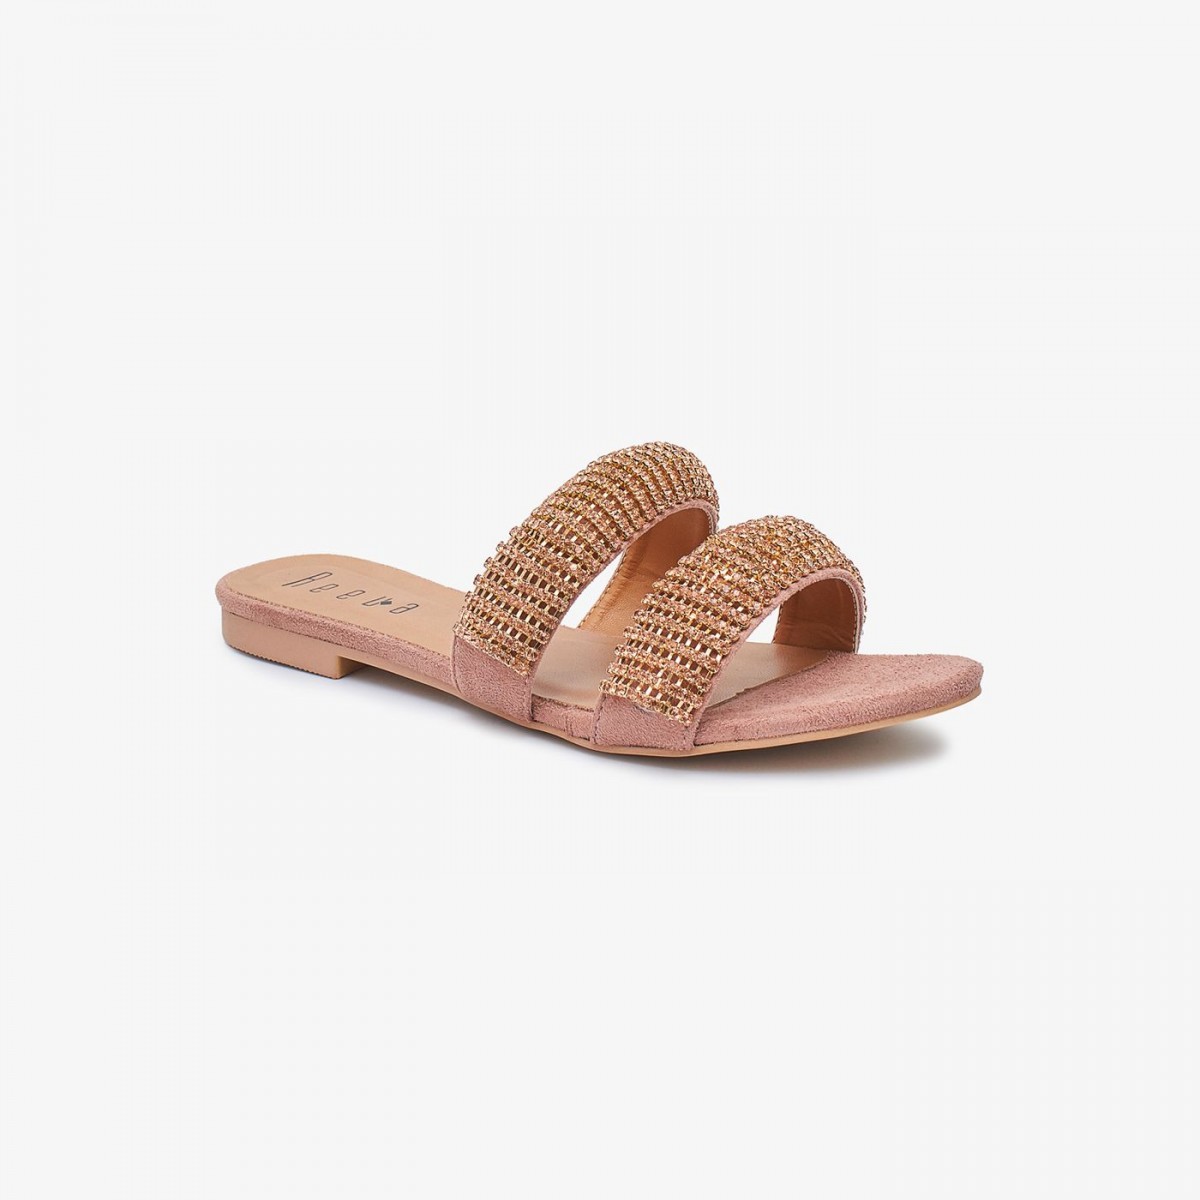 Reeva Double Strap Chappals Rv Ch 0305 Rose Gold - Lawncollection.pk